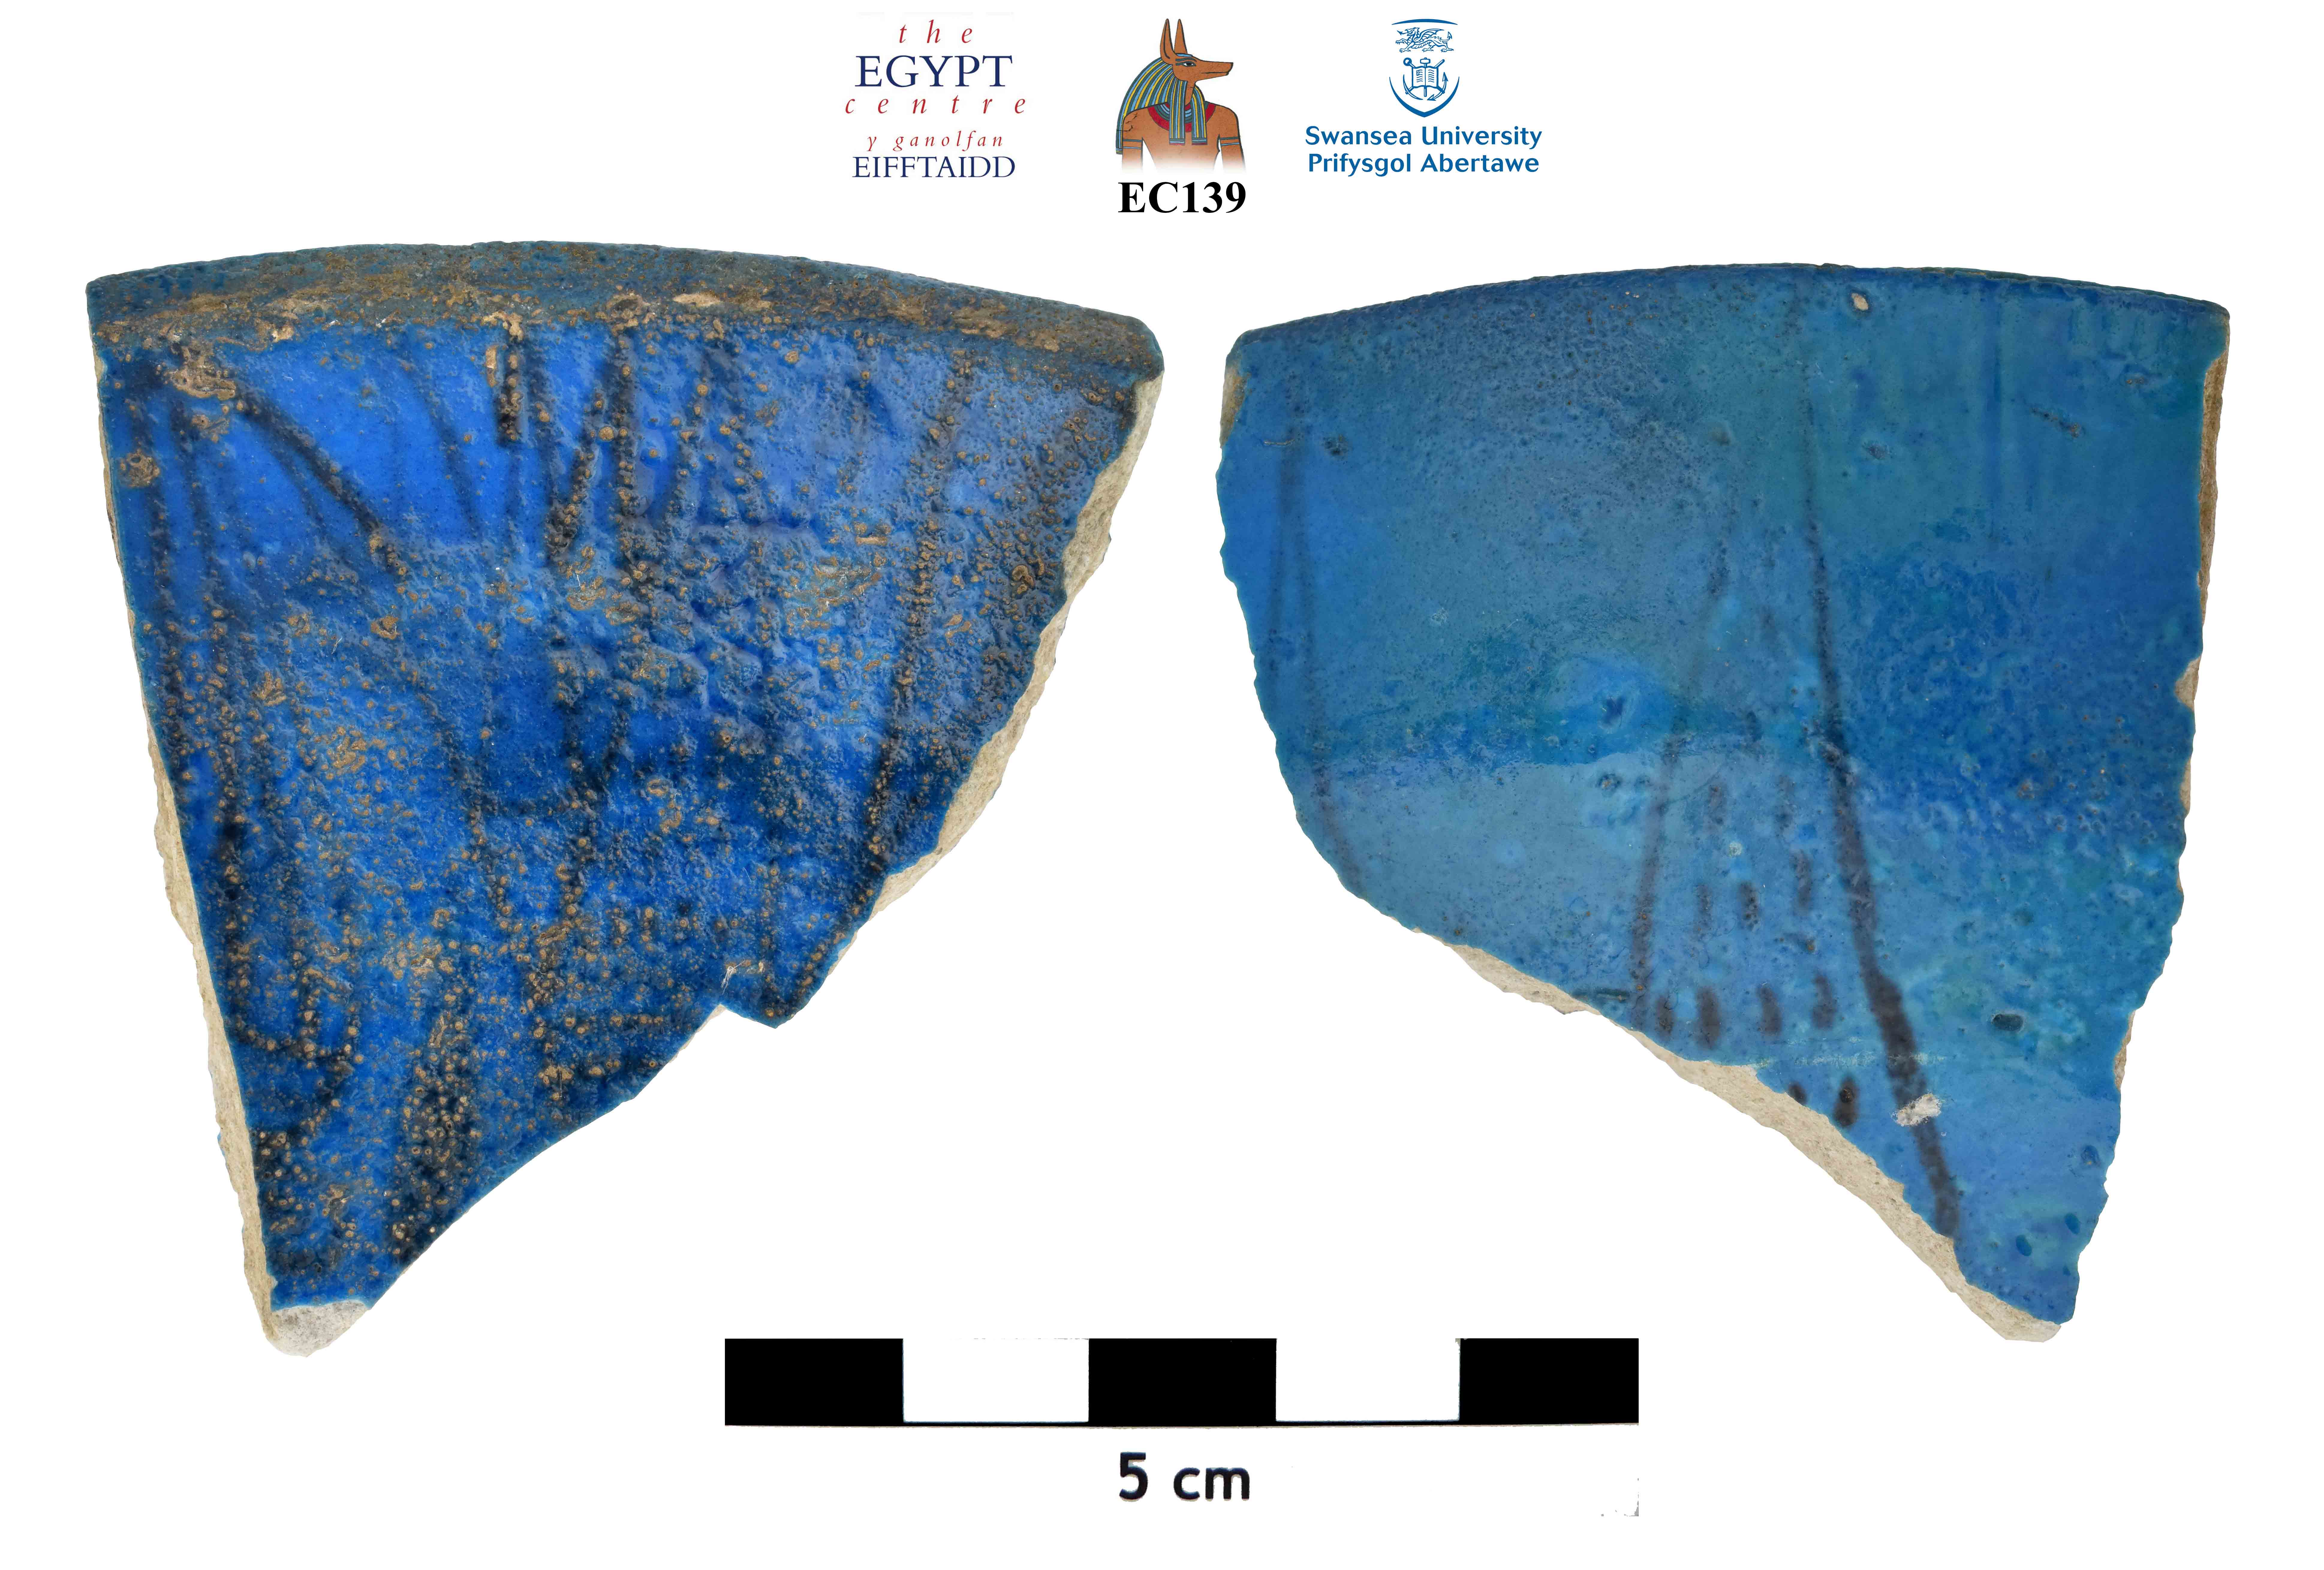 Image for: Rim sherd of a faience vessel